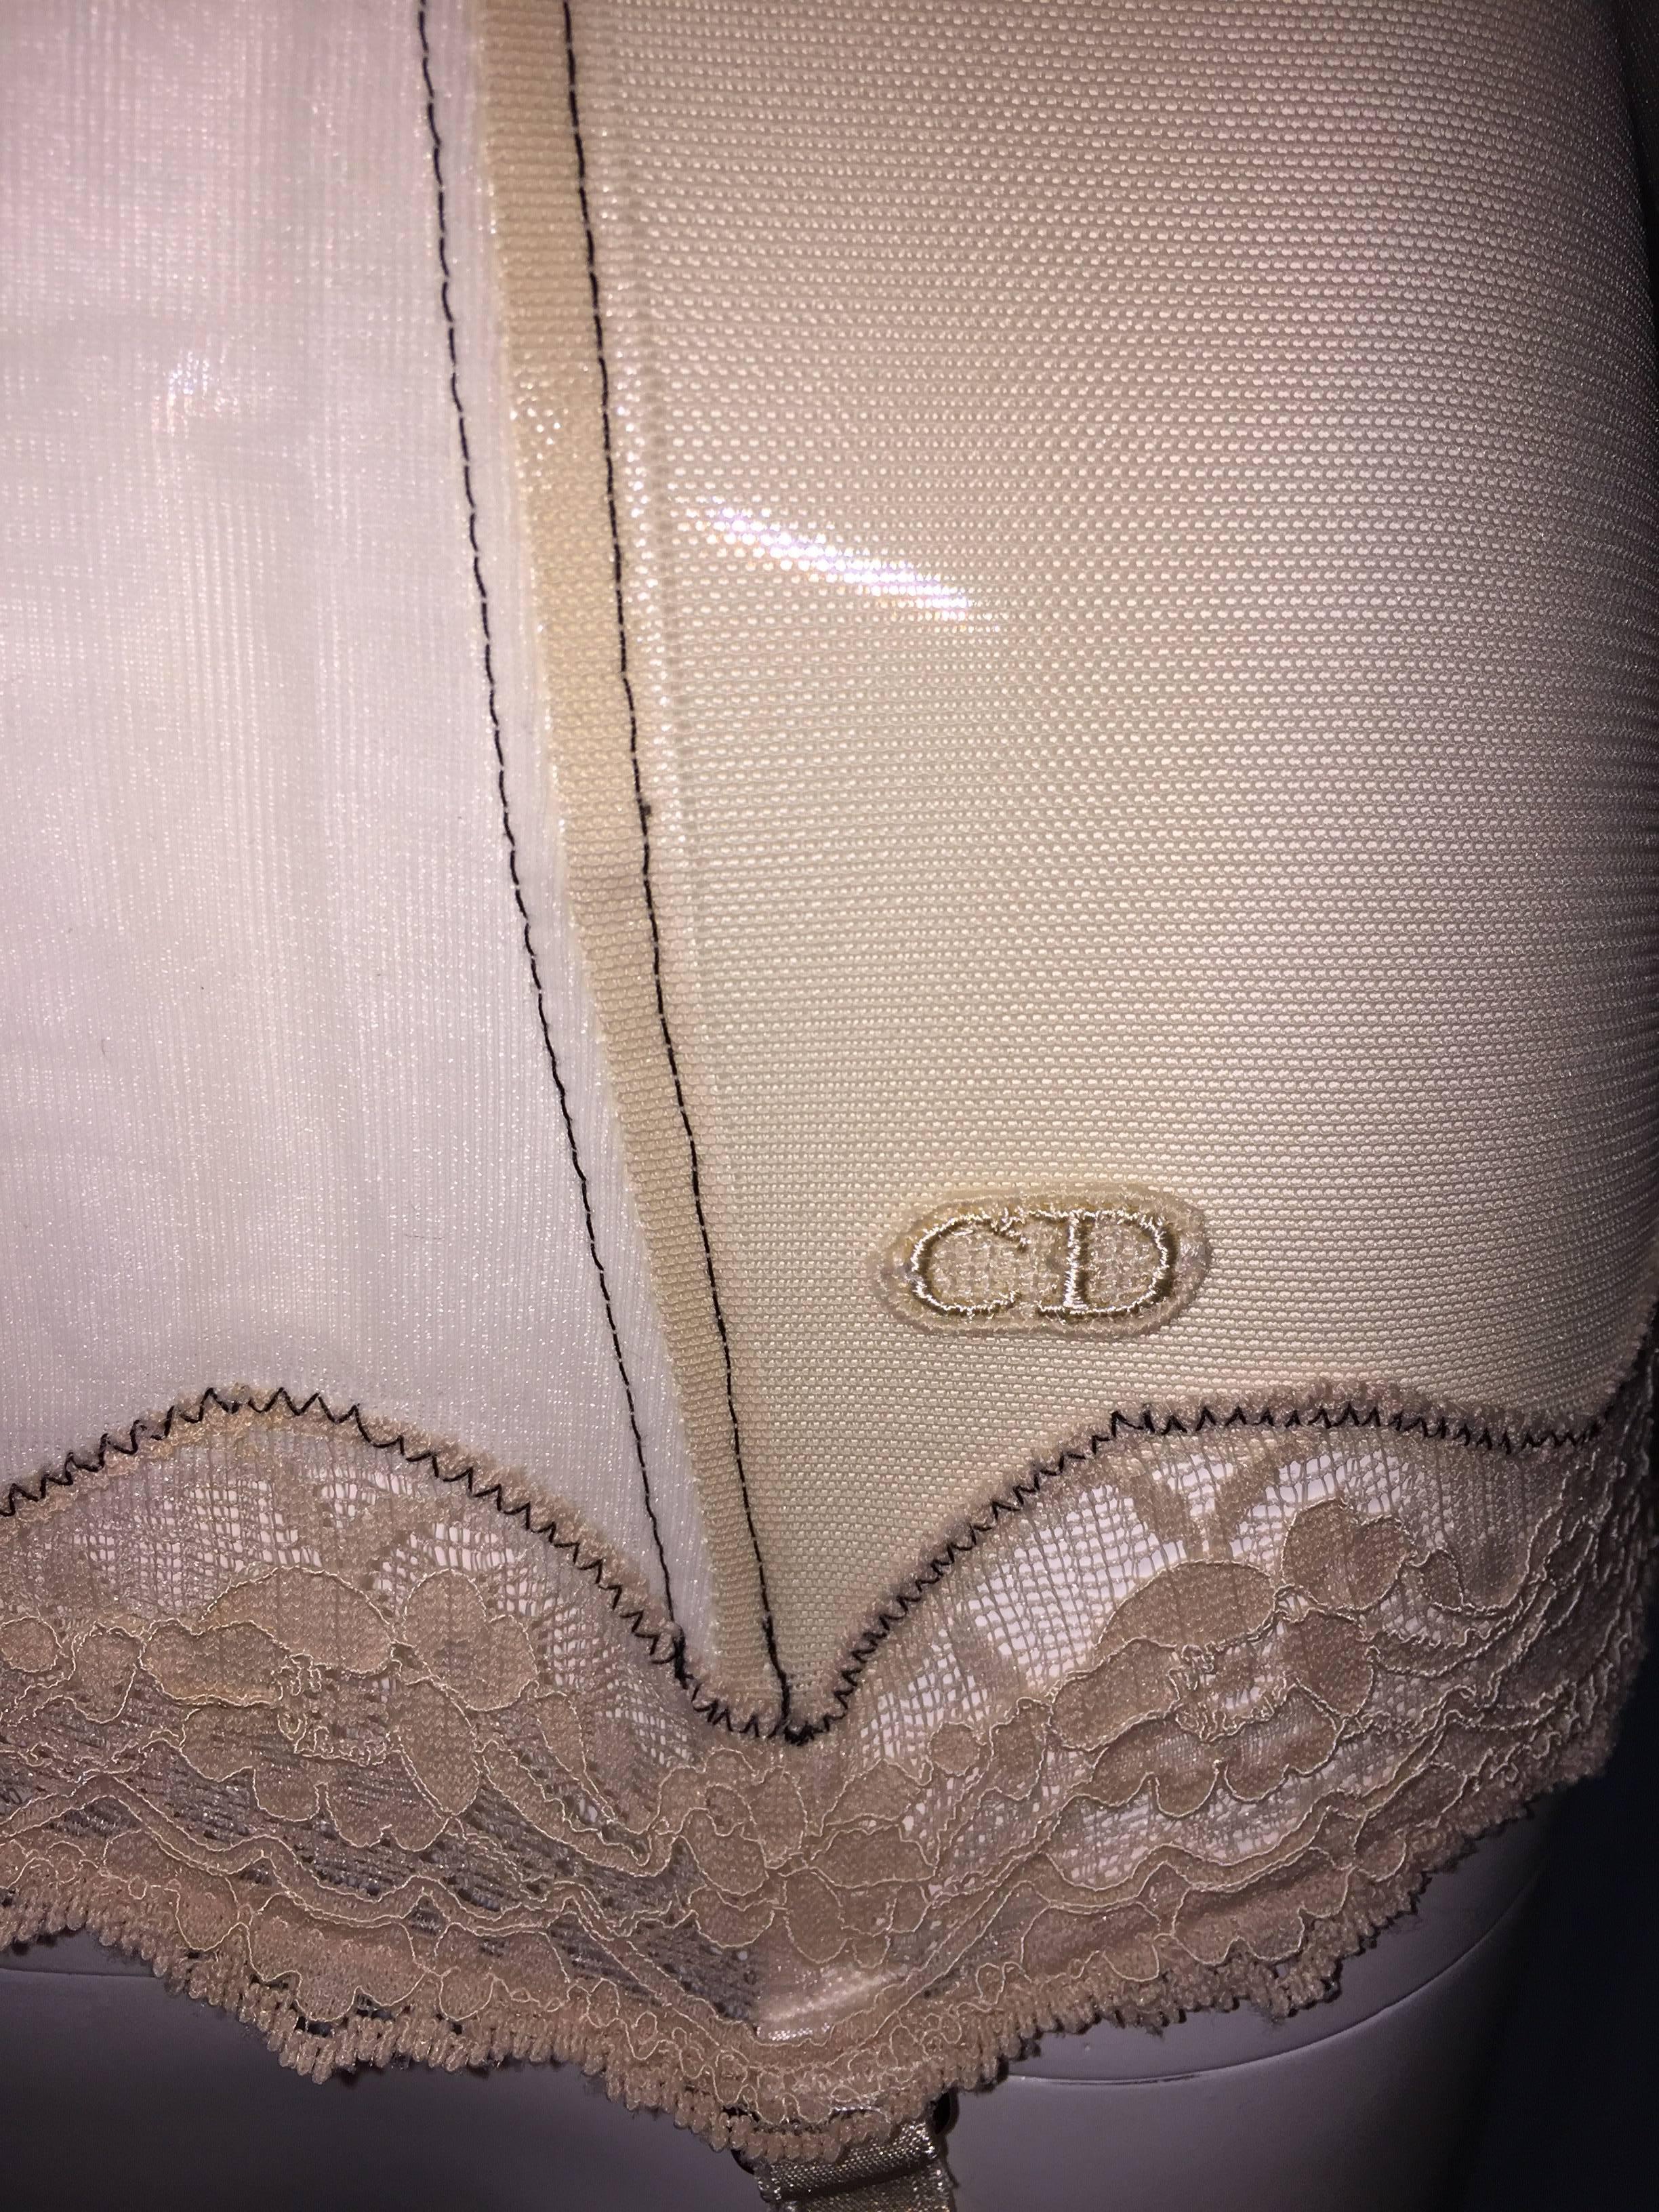 Beige 1990s Christian Dior Nude Sheer Mesh Pin-Up Corset Bustier Top XS/S C Cup